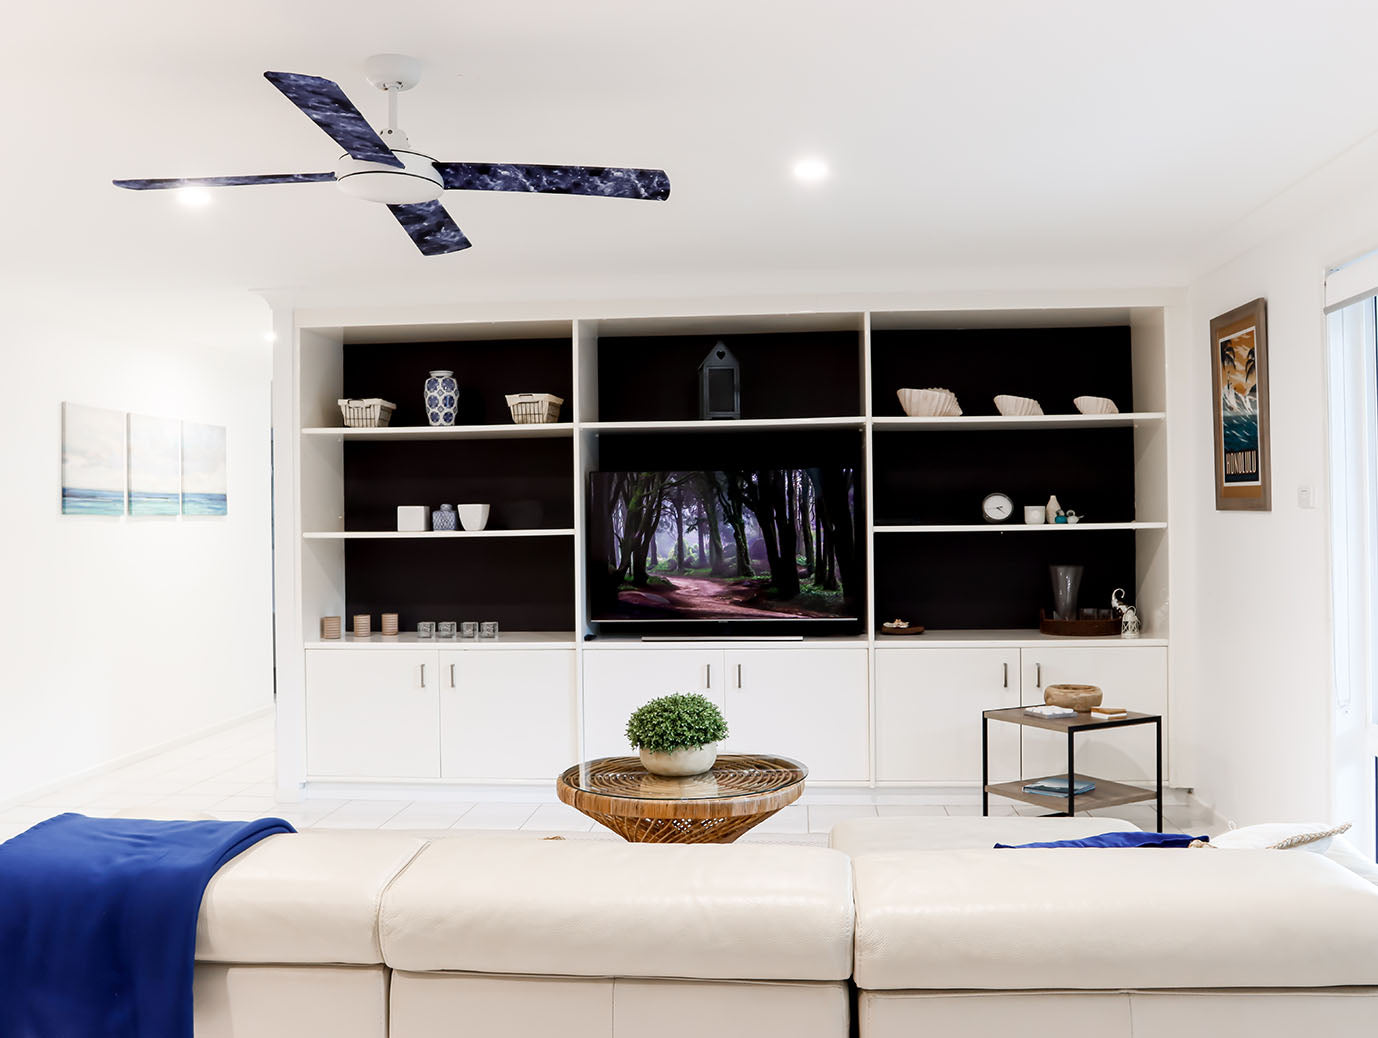 Fan Covers of the night sky in living room